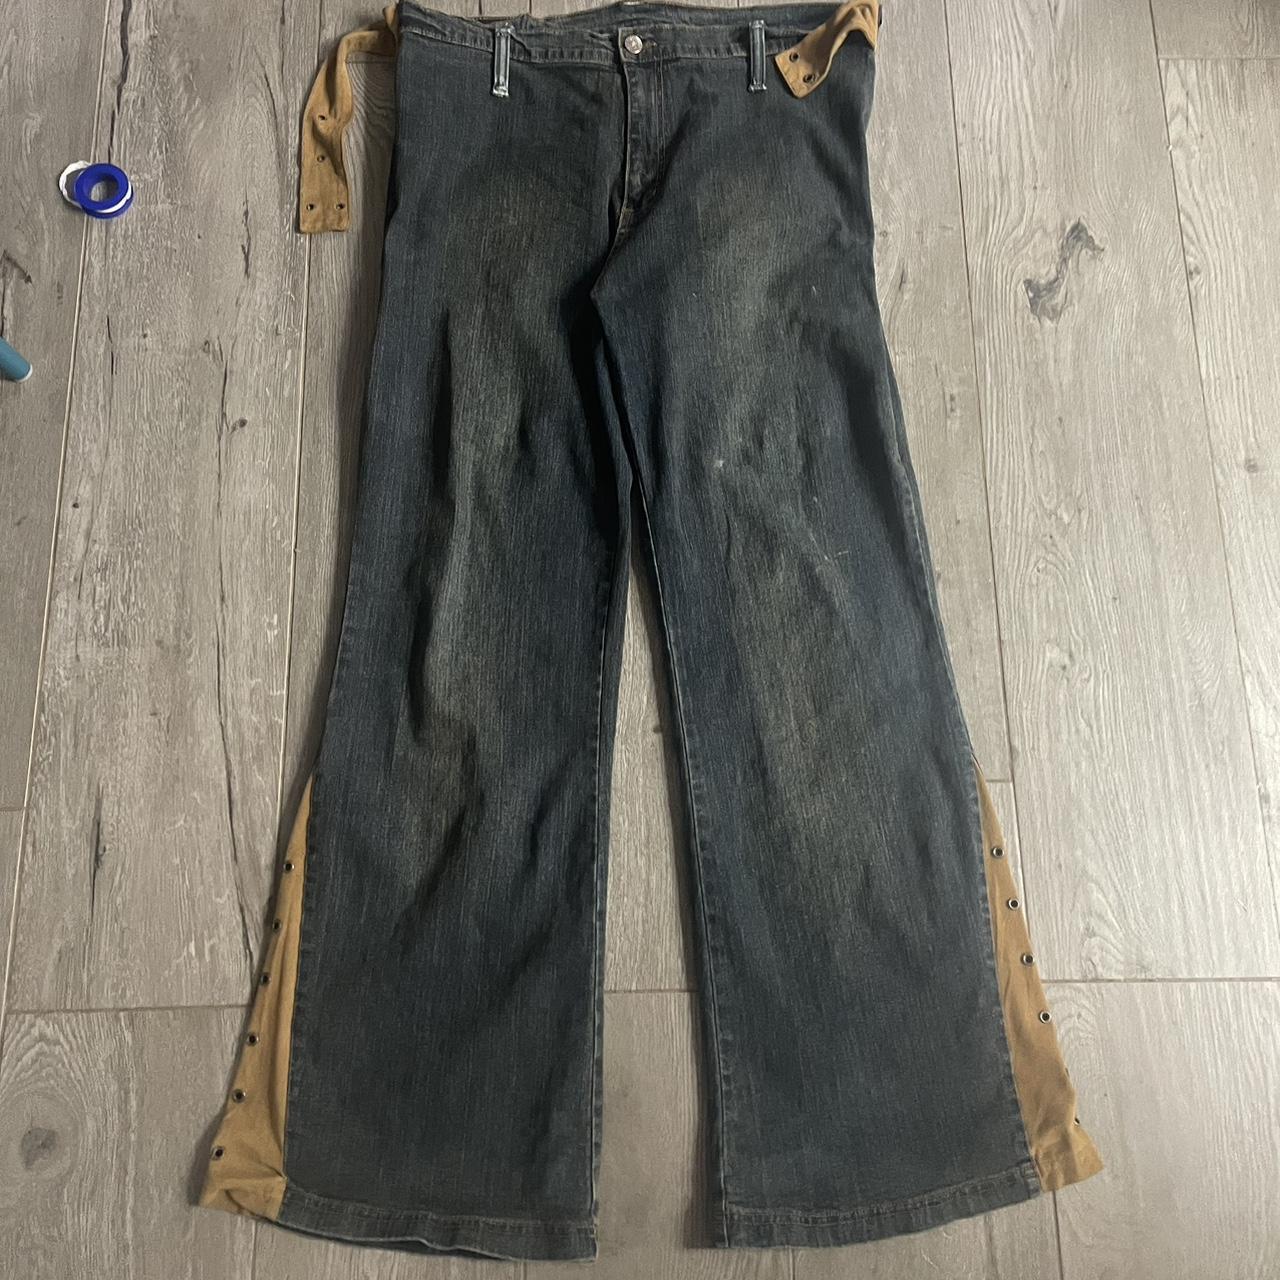 Flared Green Wash Jeans Cool wash to them aswell... - Depop